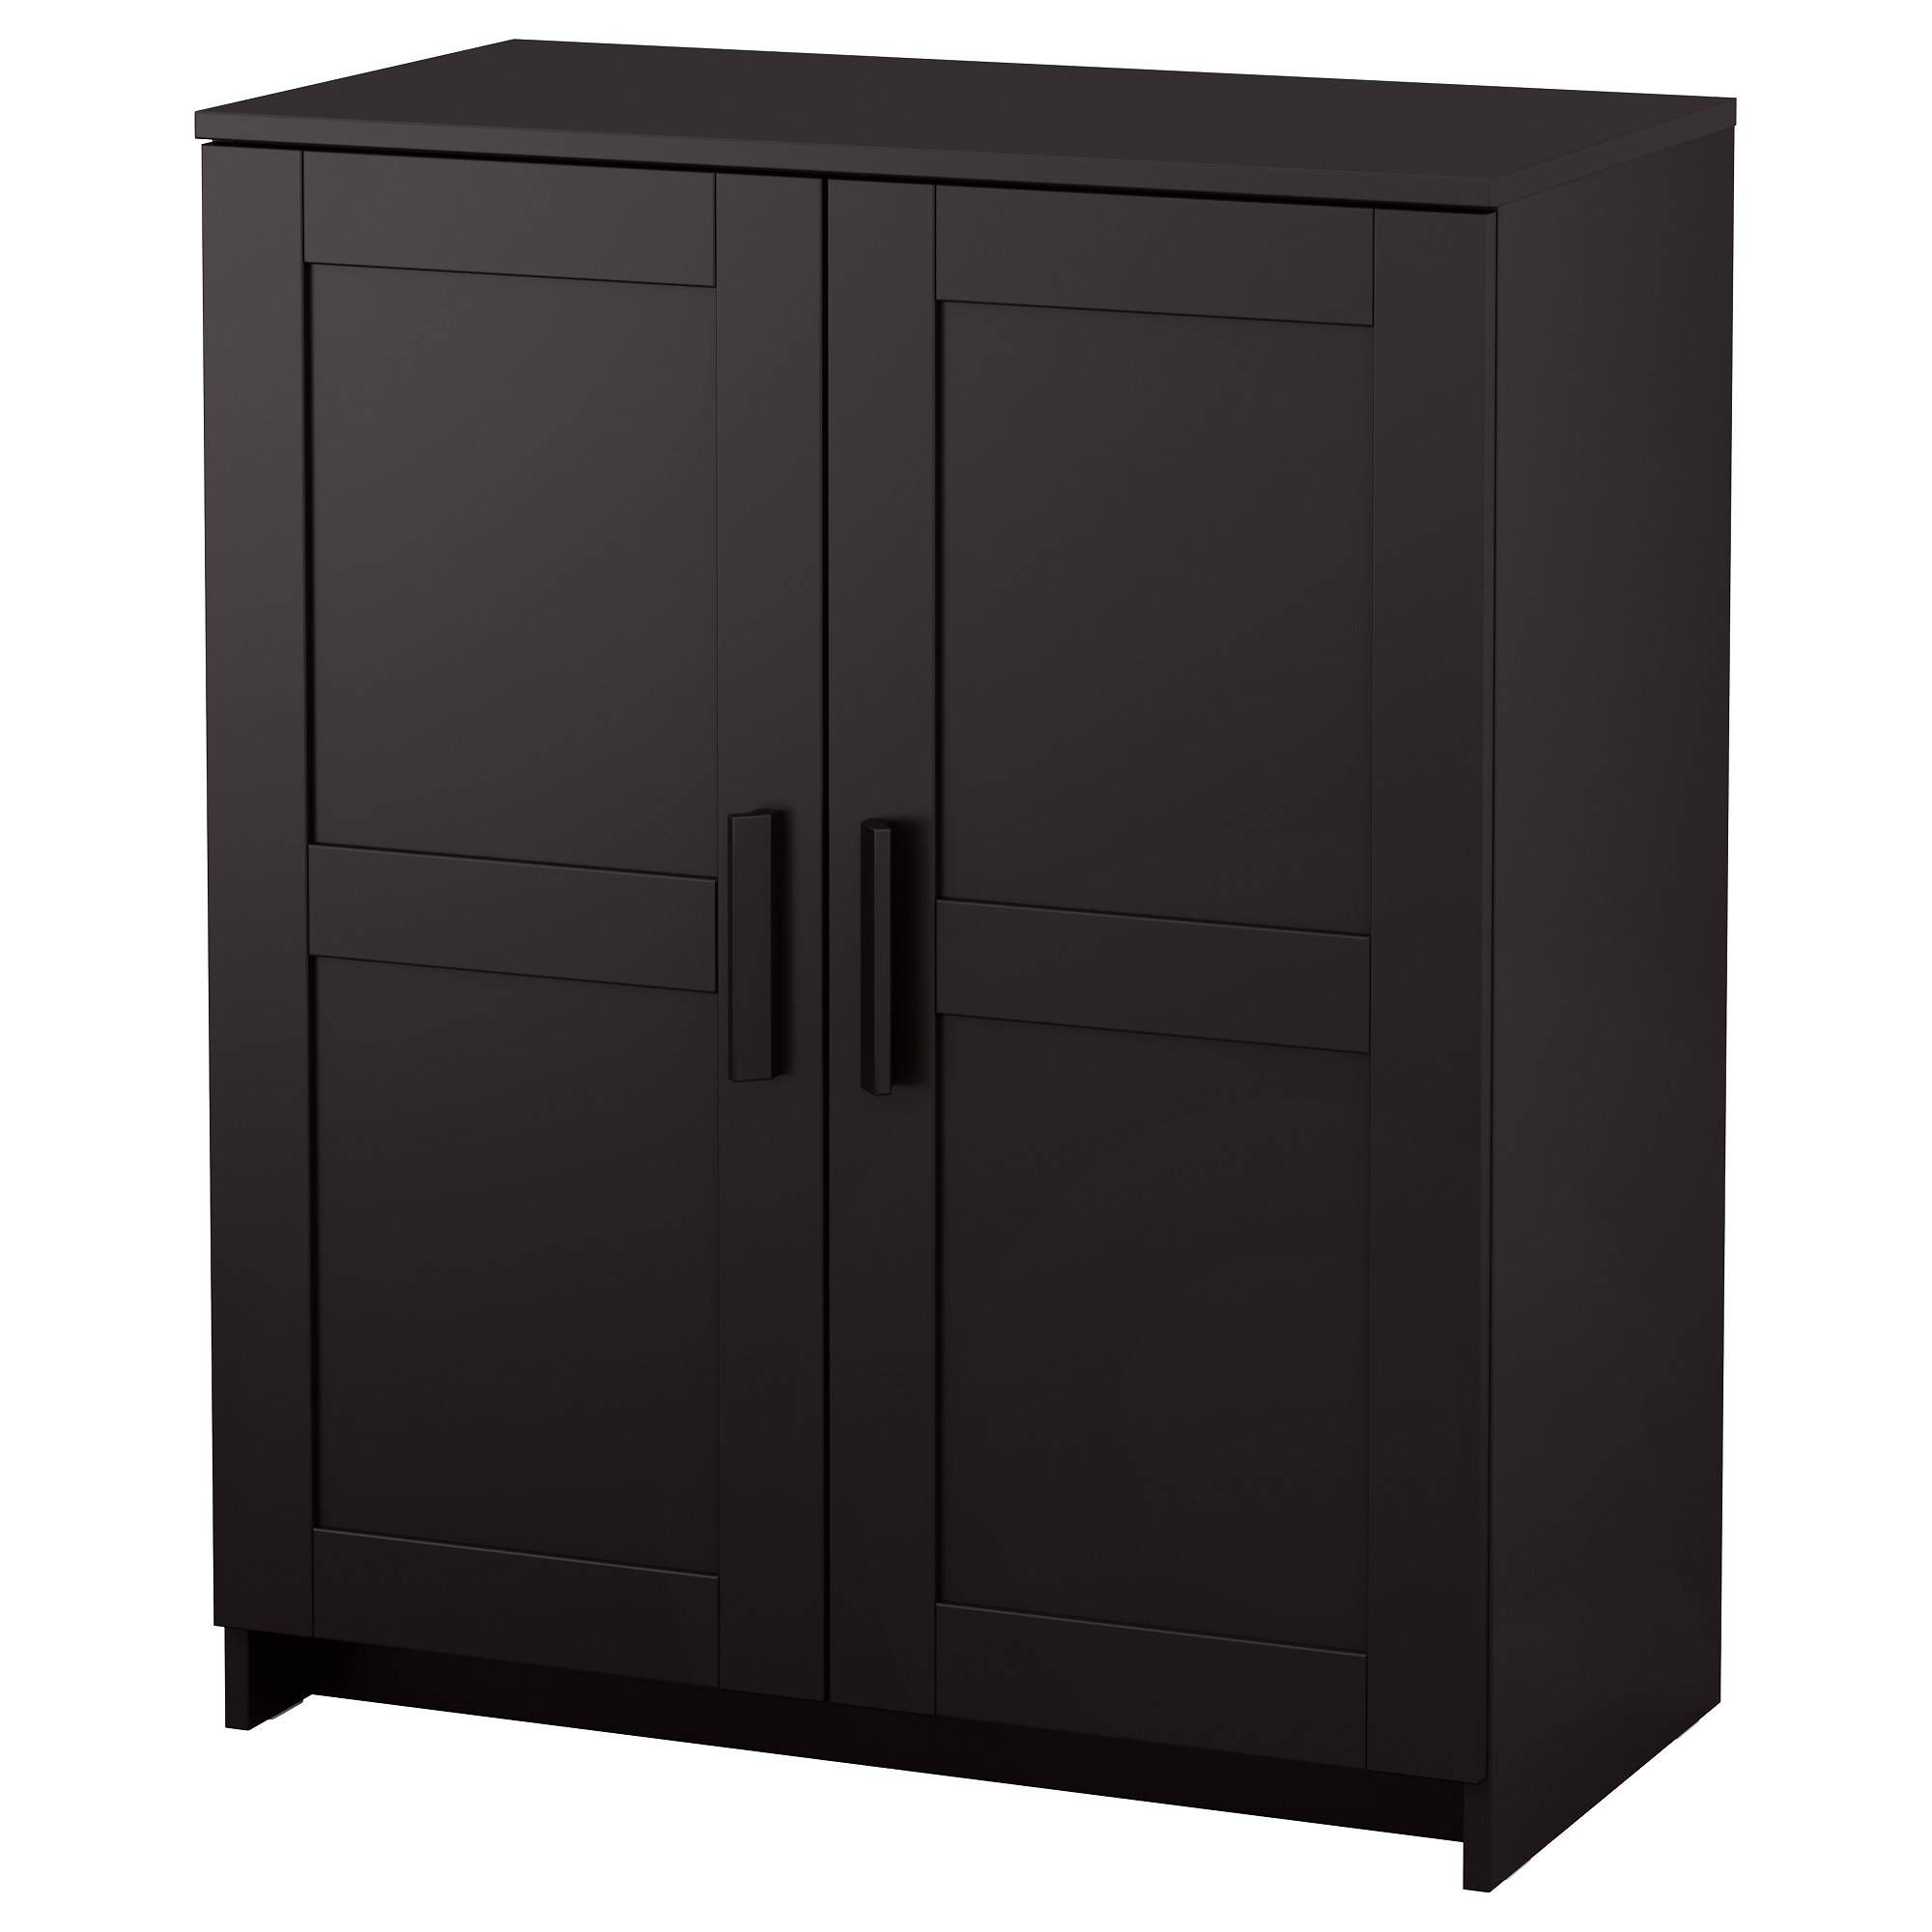 Cabinets & Sideboards – Ikea In Shallow Sideboard Cabinets (View 5 of 15)